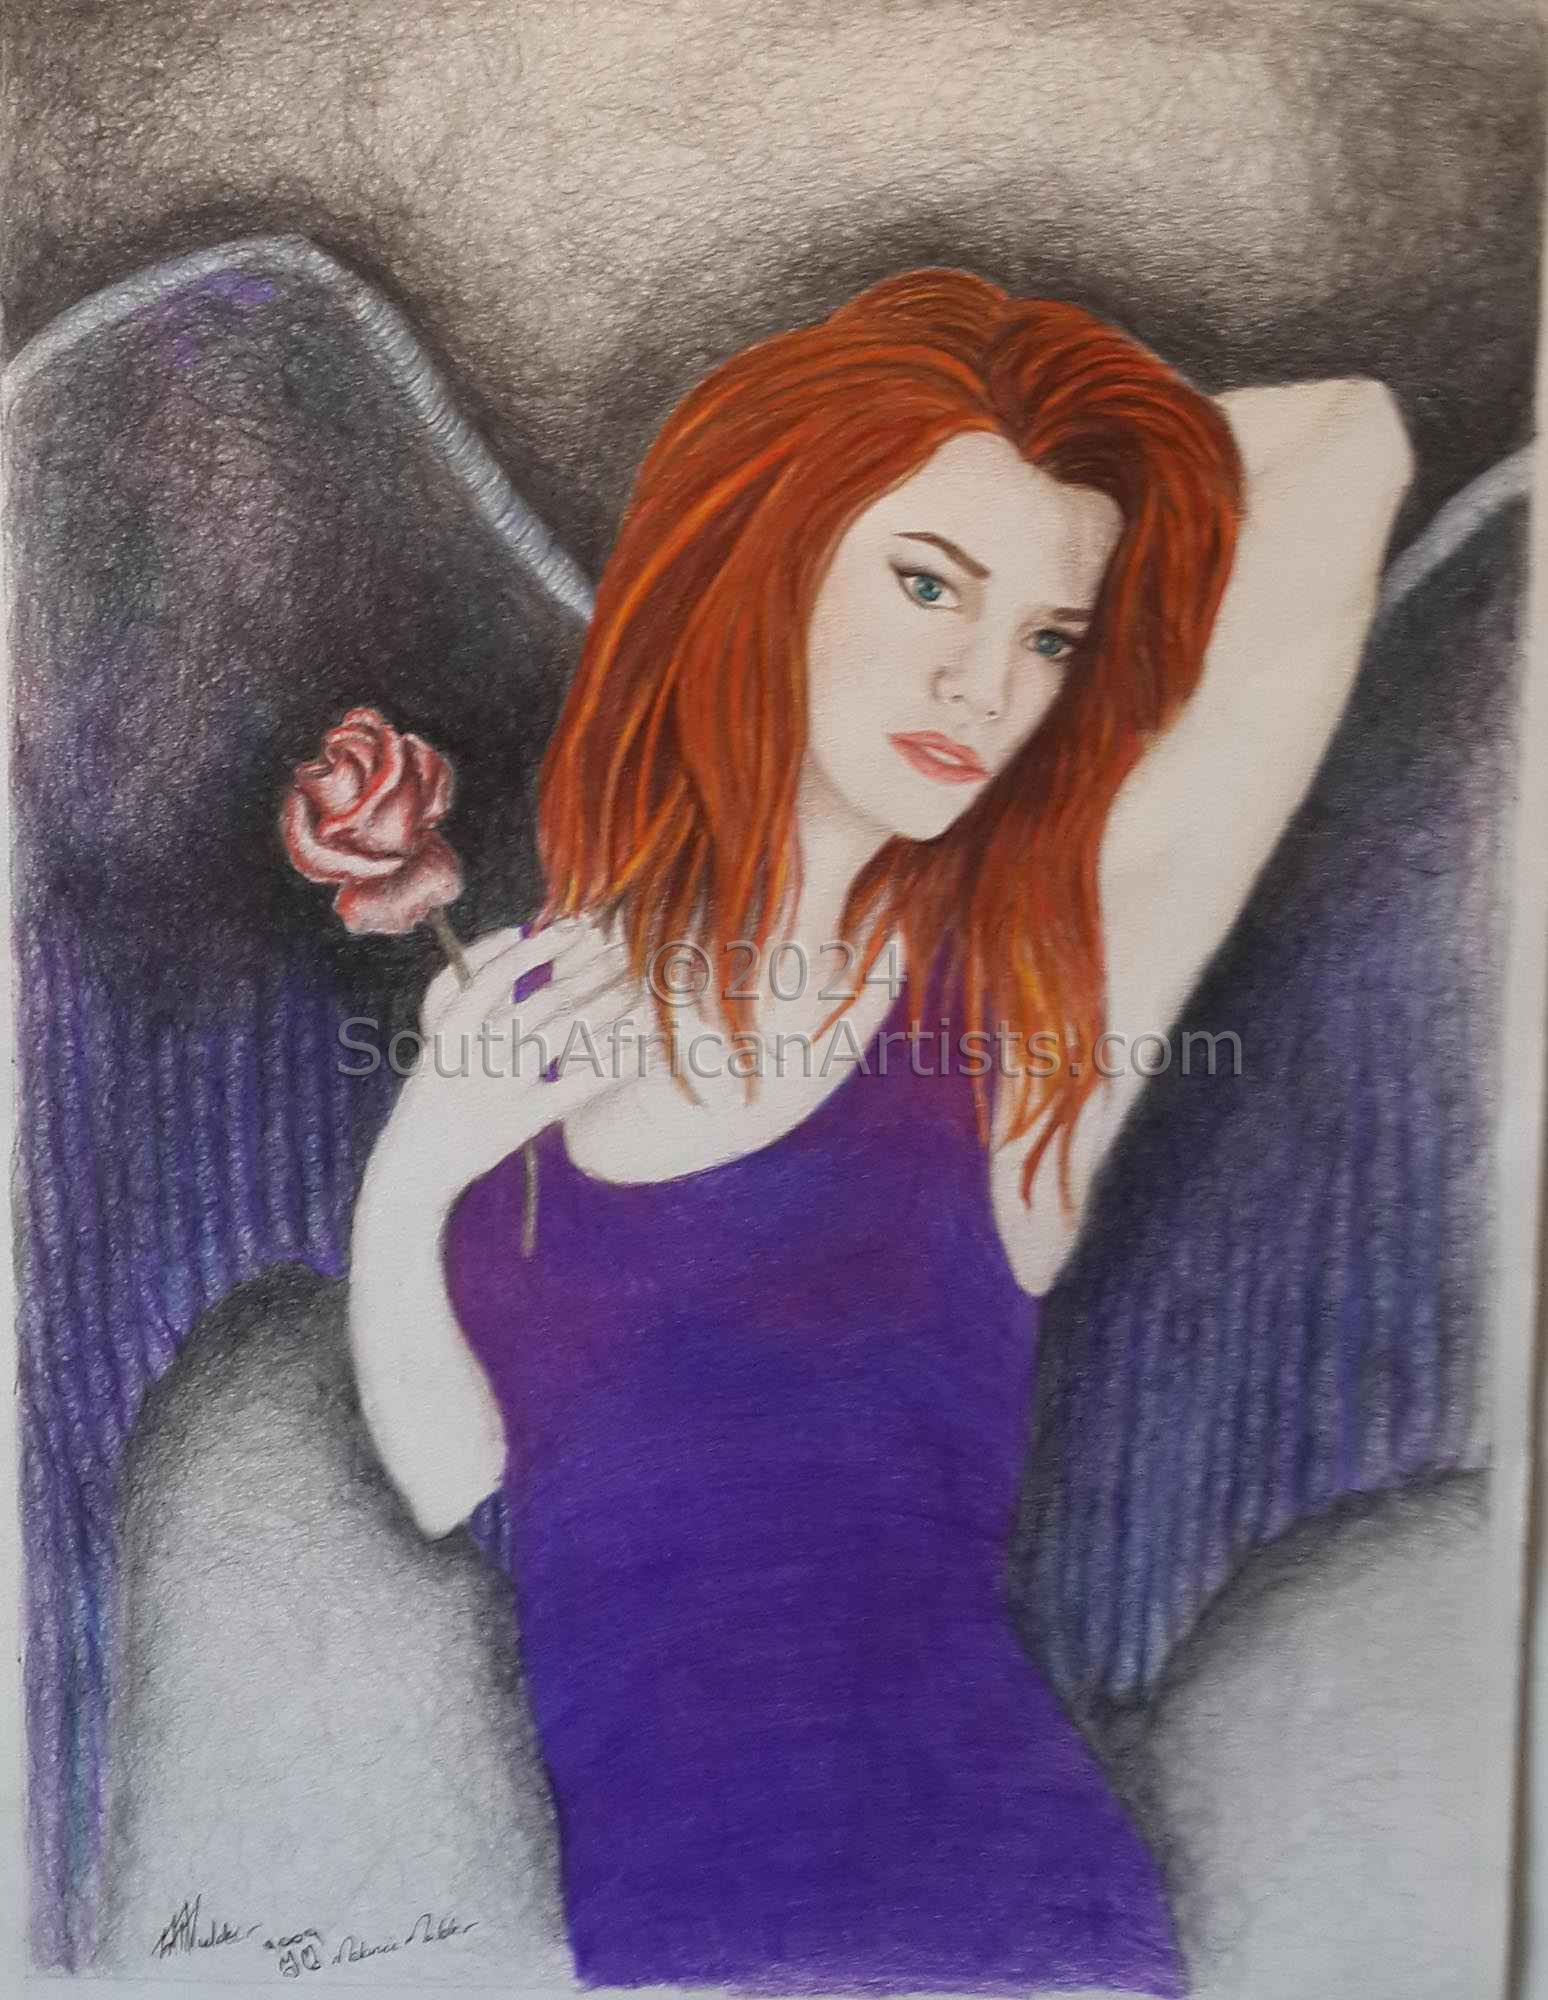 Angel: Dawn And The Rose